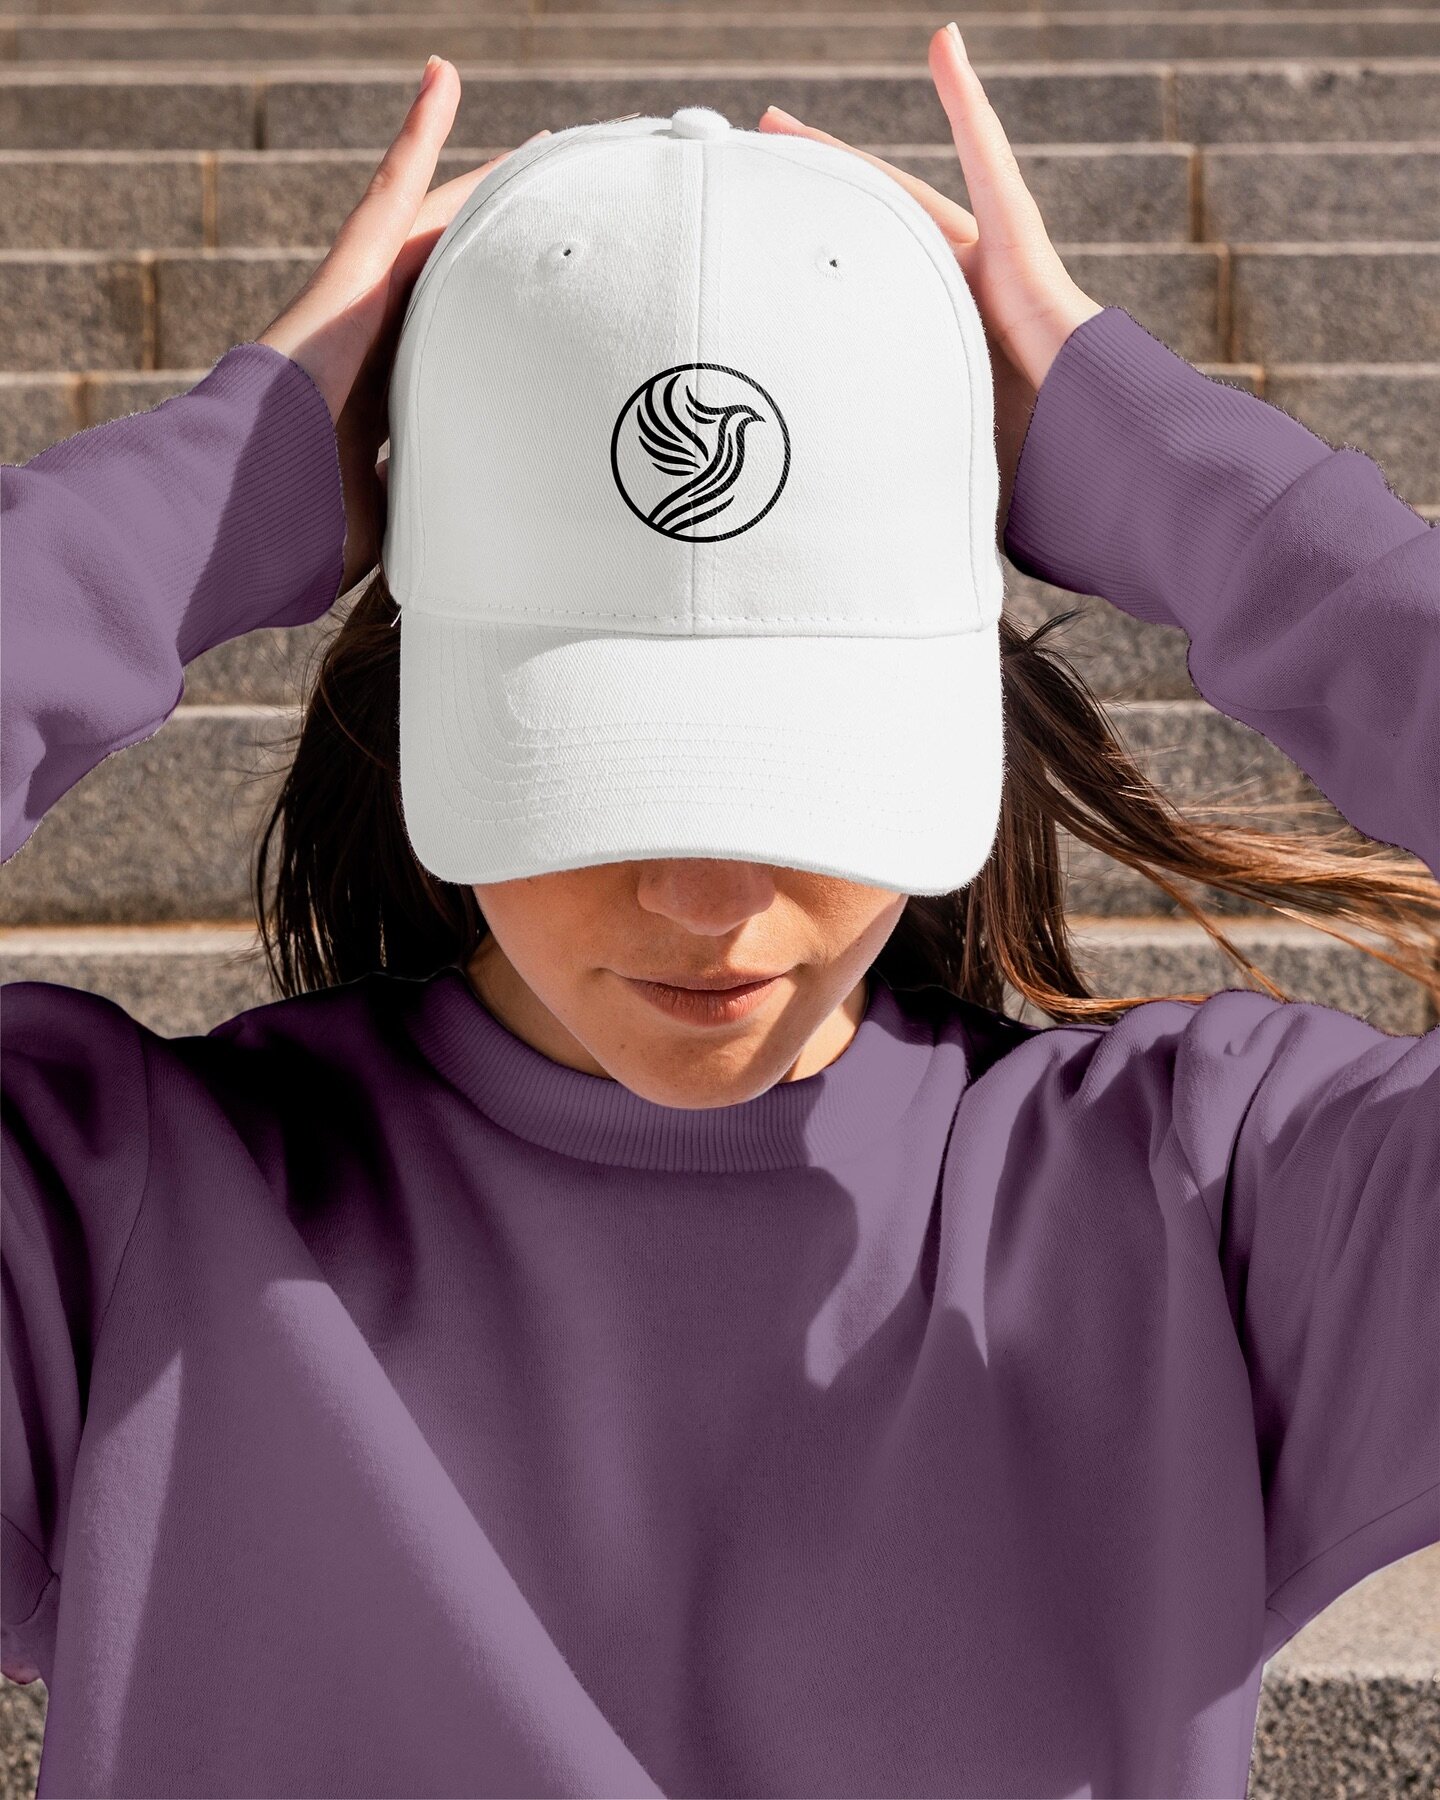 Spot the magic on the cap! ✨ When your logo design decides to step out in style, even the ordinary becomes a statement. Who said branding can&rsquo;t have its own fashion sense? 

✏️ Designed for @lisa.z.lisser 

#LogoLove #designindetail